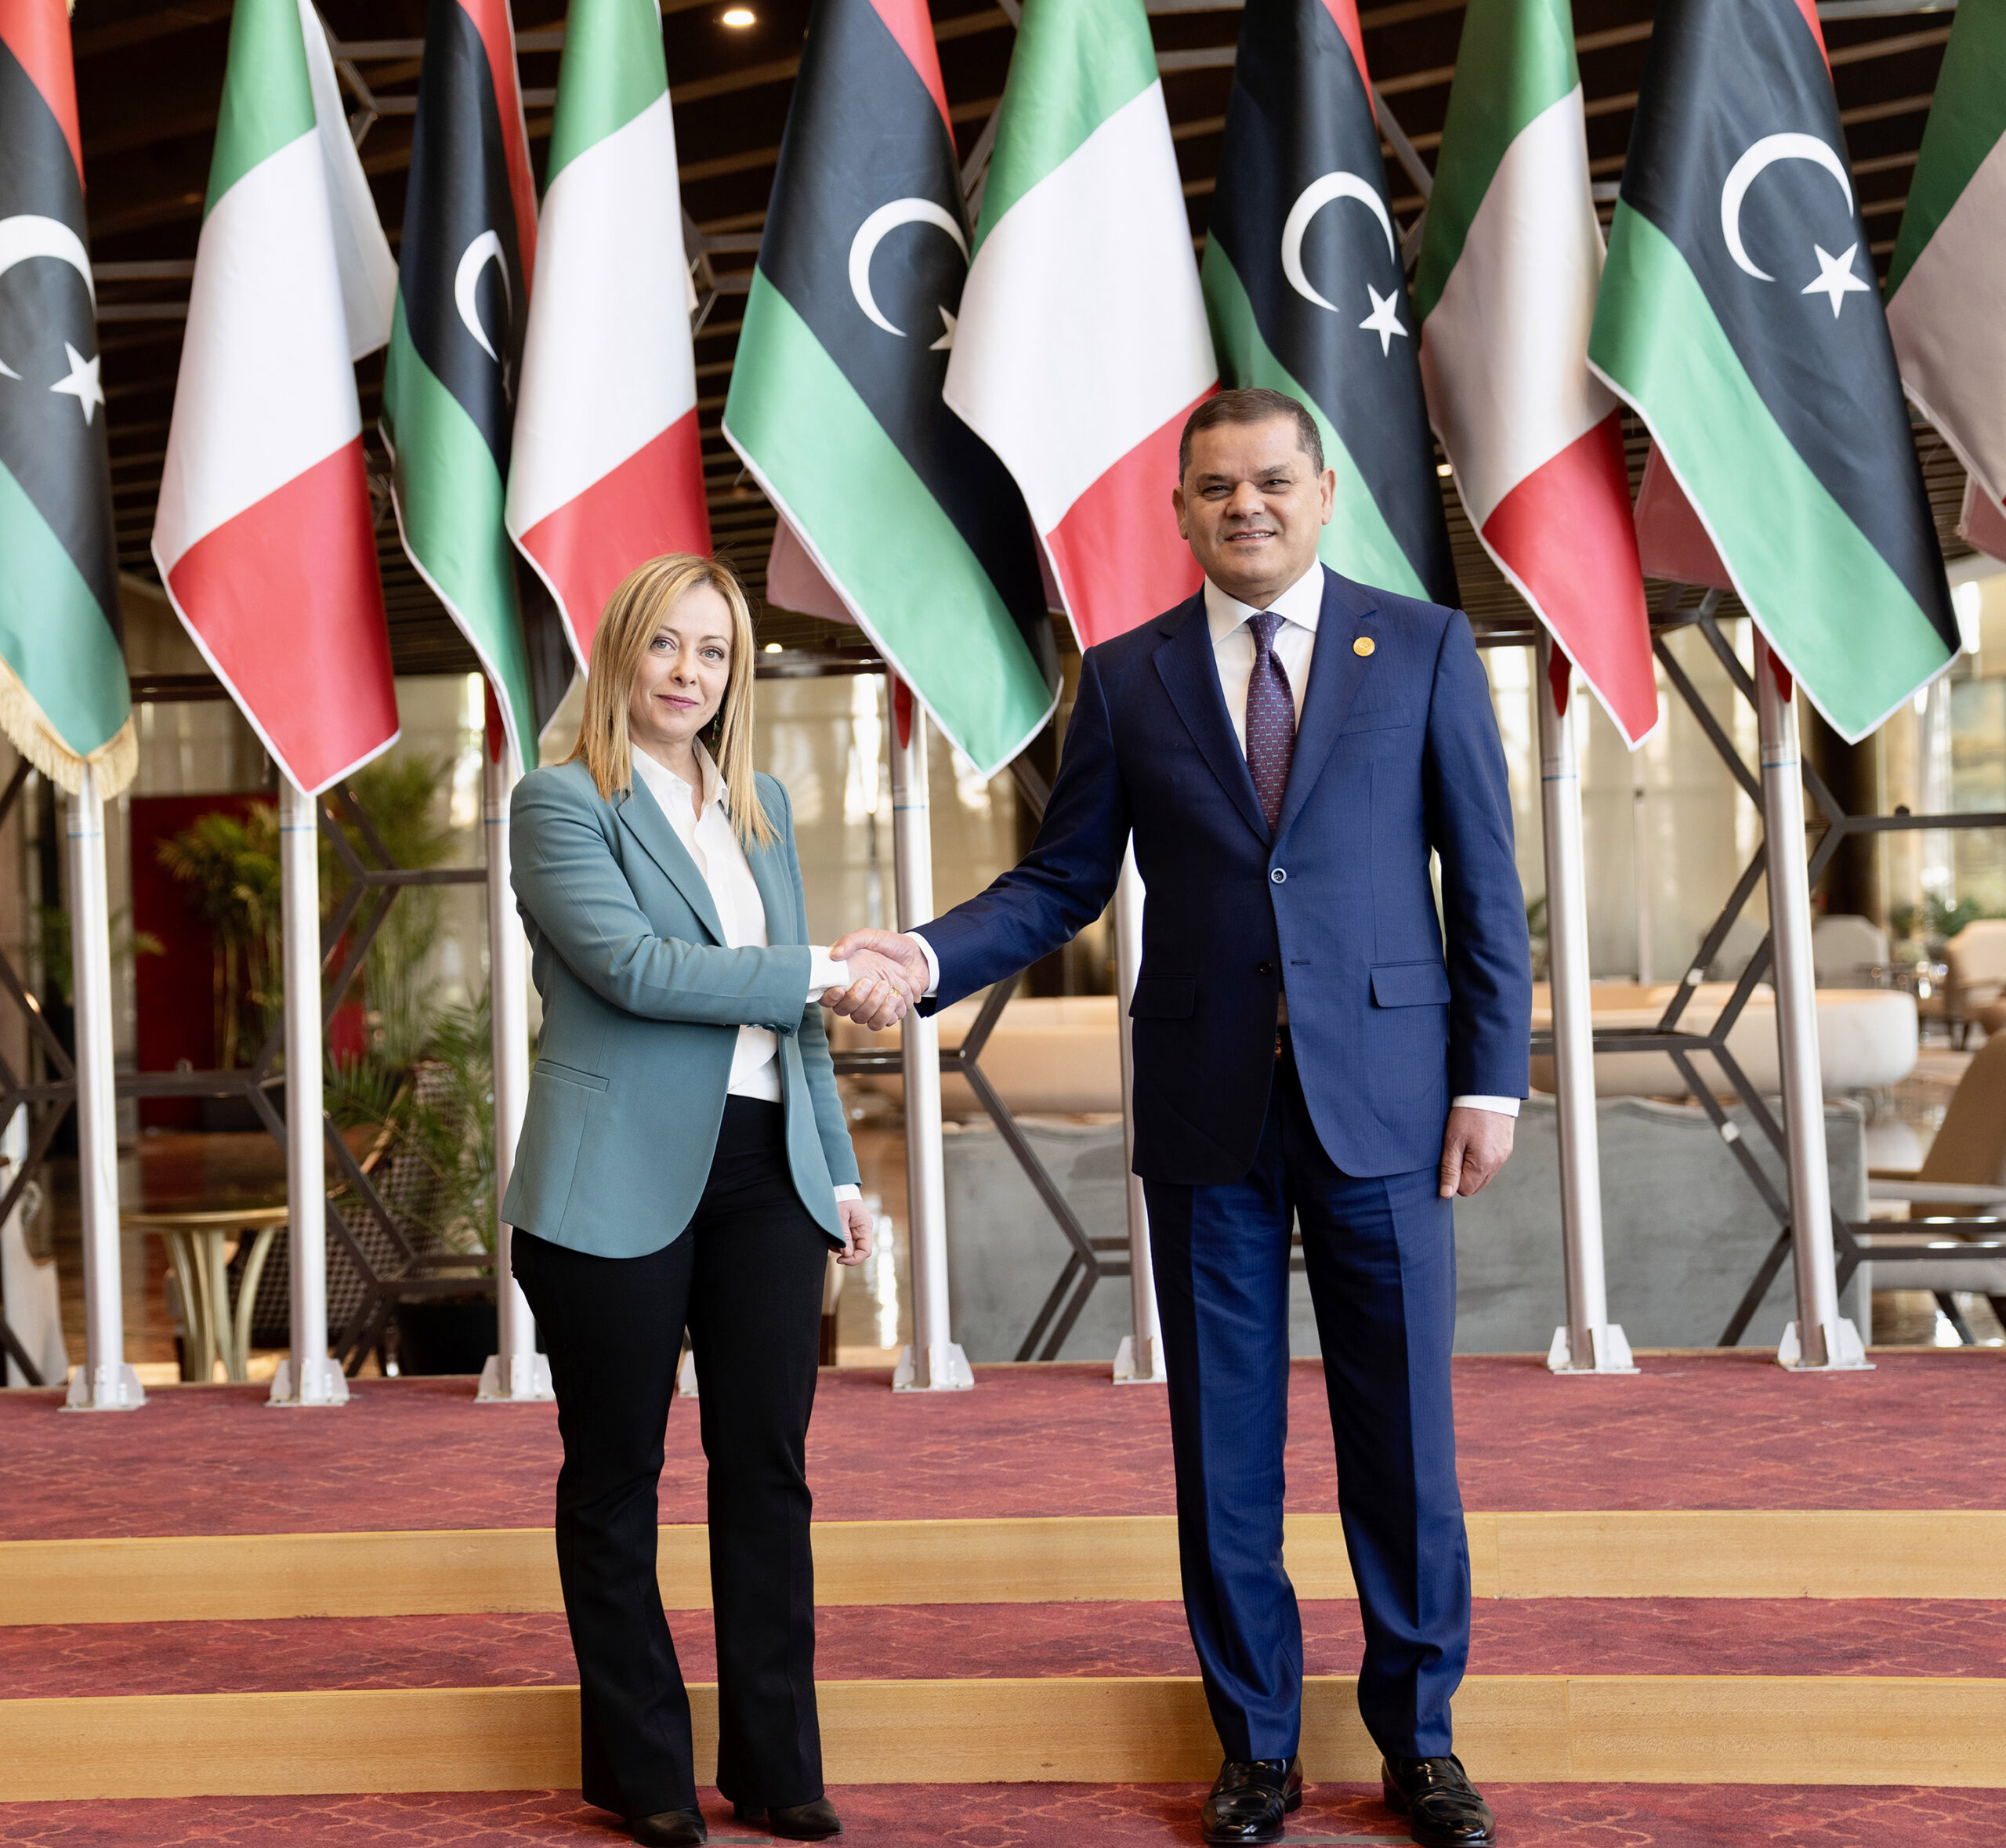 Italy’s Meloni visits Libya, seals cooperation agreements in Libya